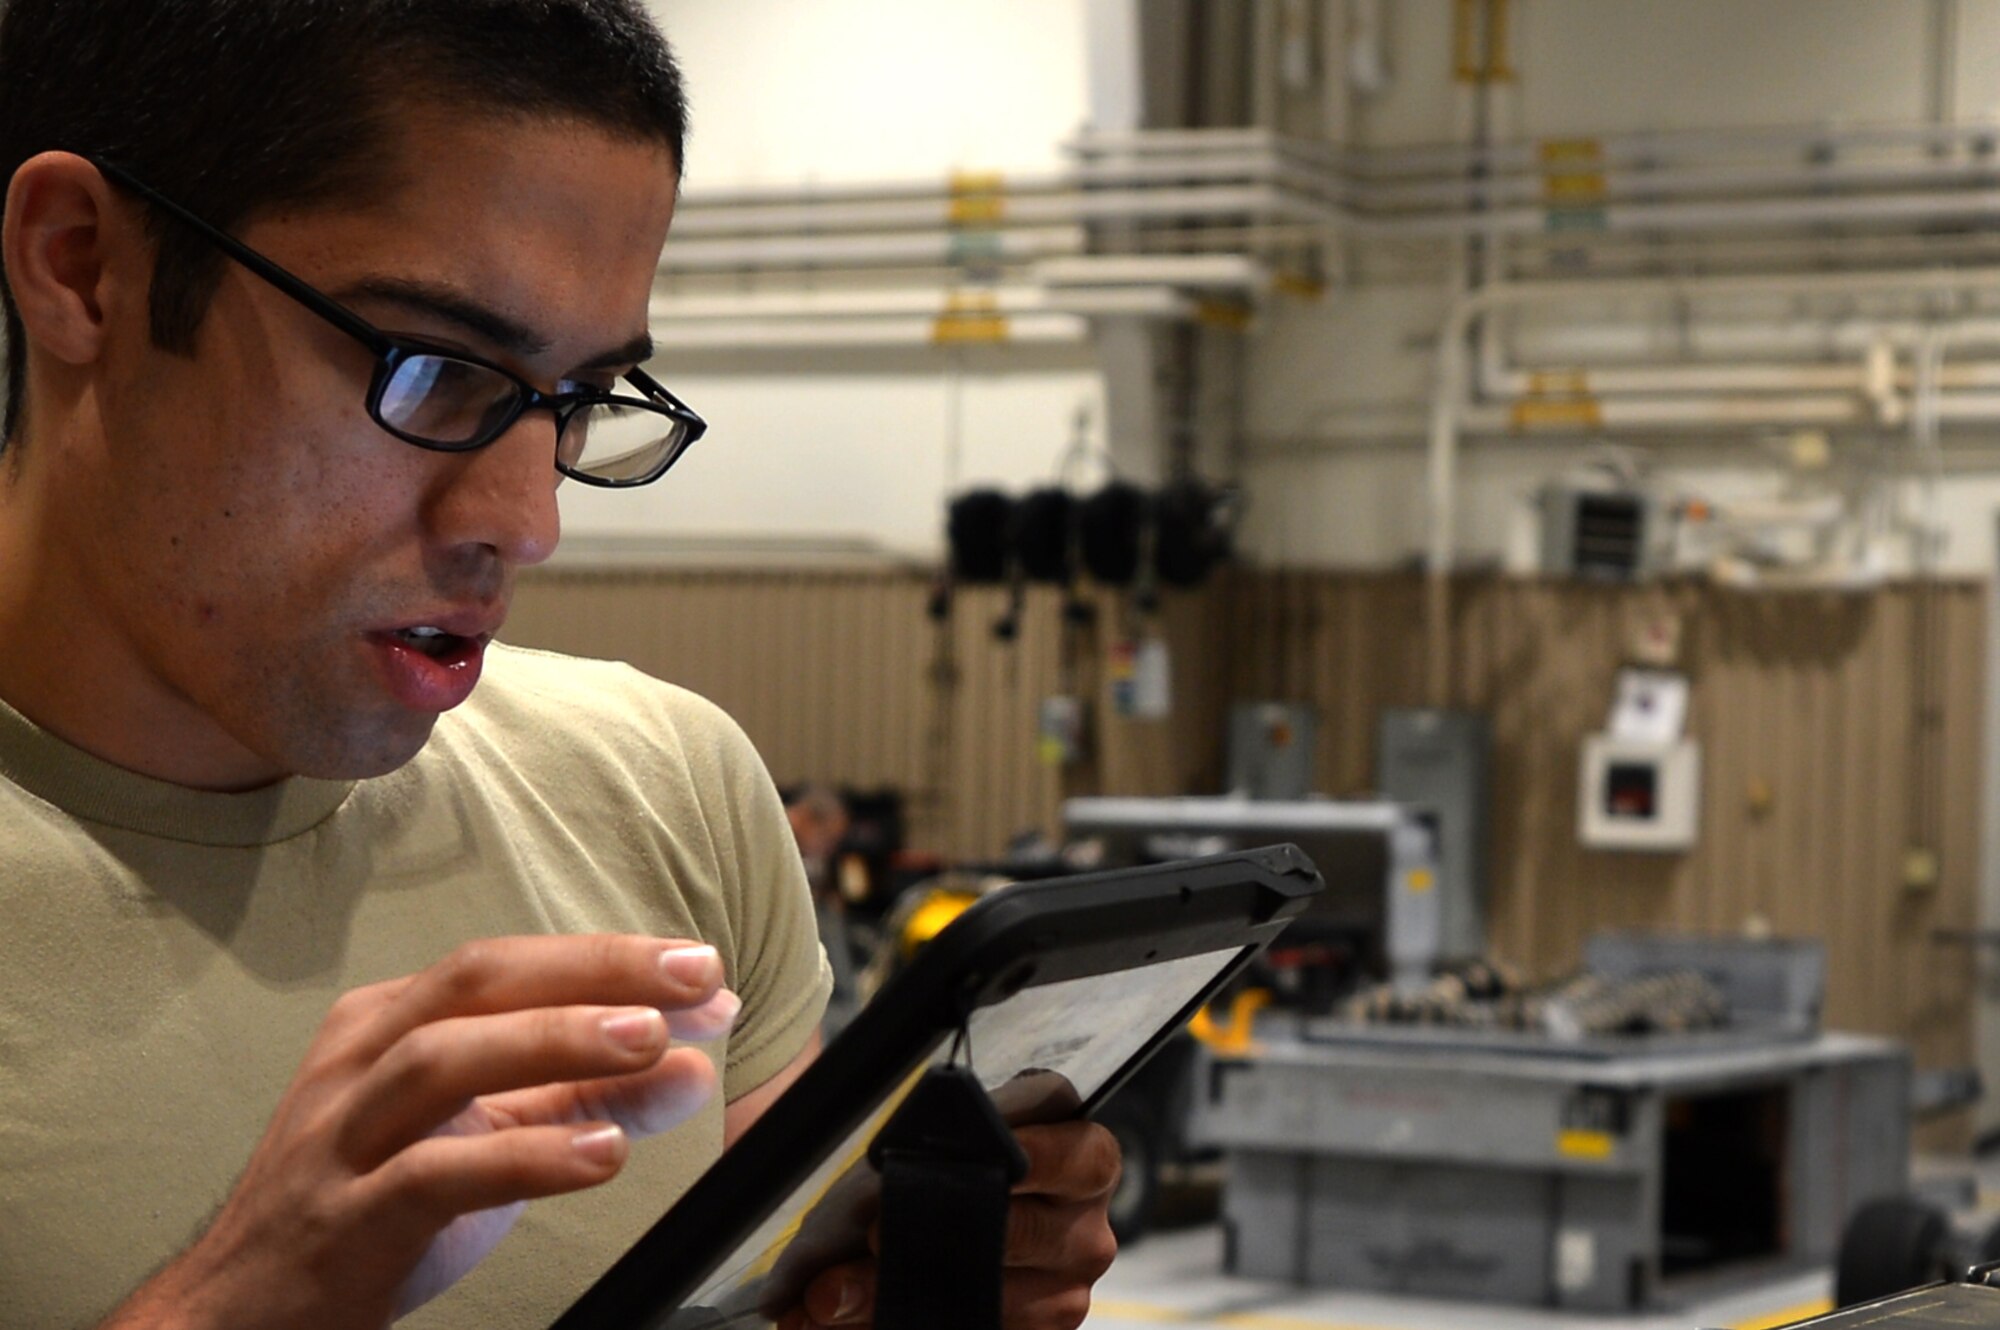 U.S. Air Force Staff Sgt. Michael Maldonado, 20th Equipment Maintenance Squadron aerospace ground equipment journeyman, reviews a technical order (TO) at Shaw Air Force Base, S.C., May 24, 2017. Maldonado reviewed the TO before performing maintenance on the generator to ensure all procedures were in accordance with safety guidelines. (U.S. Air Force photo by Airman 1st Class Christopher Maldonado)